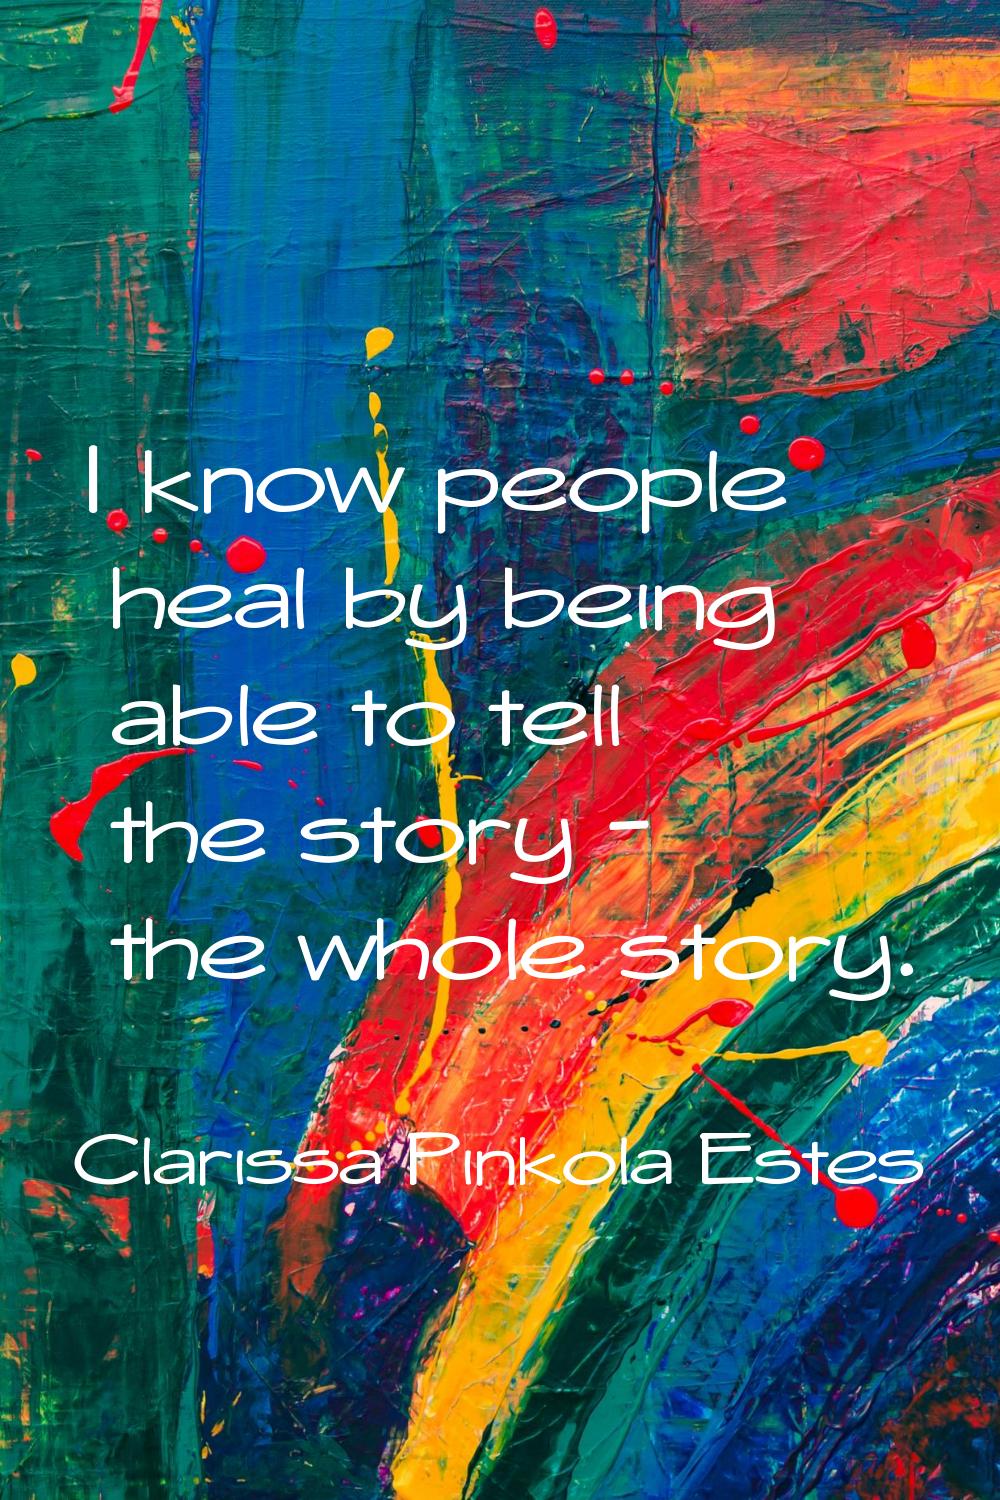 I know people heal by being able to tell the story - the whole story.